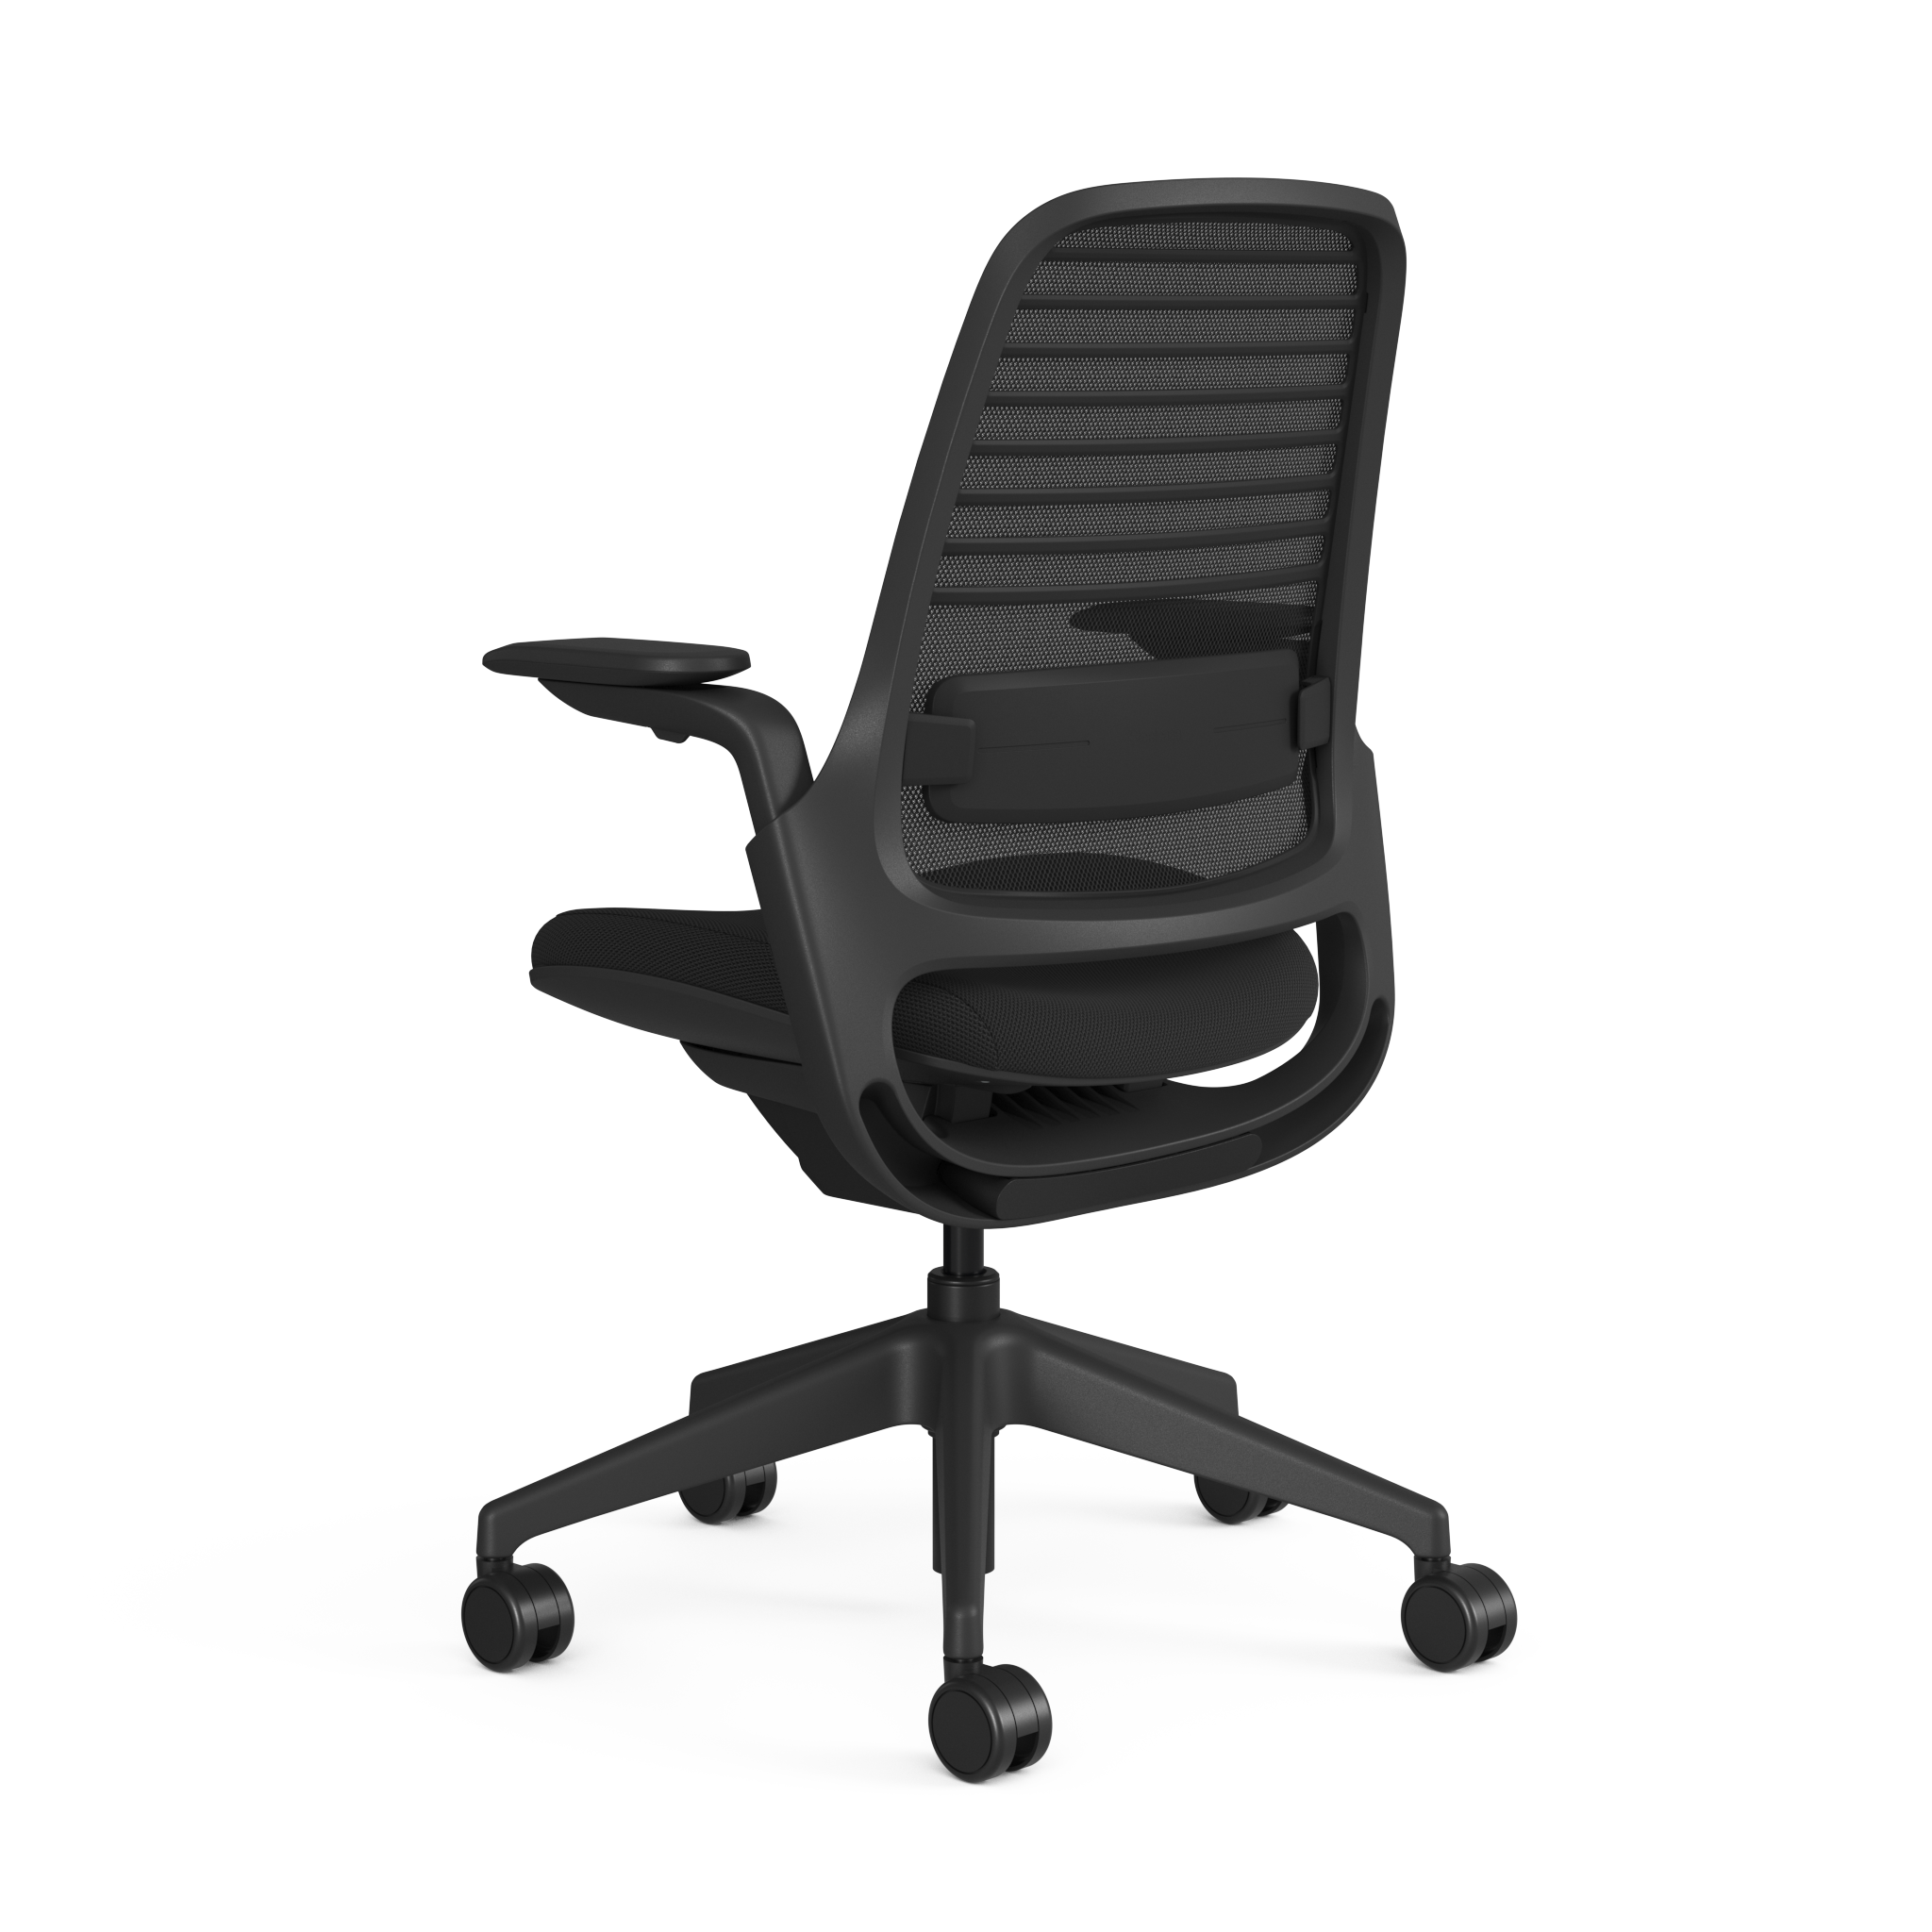 Meshback 3D Microknit Licorice; Seat Cogent Connect Licorice; Frame Black